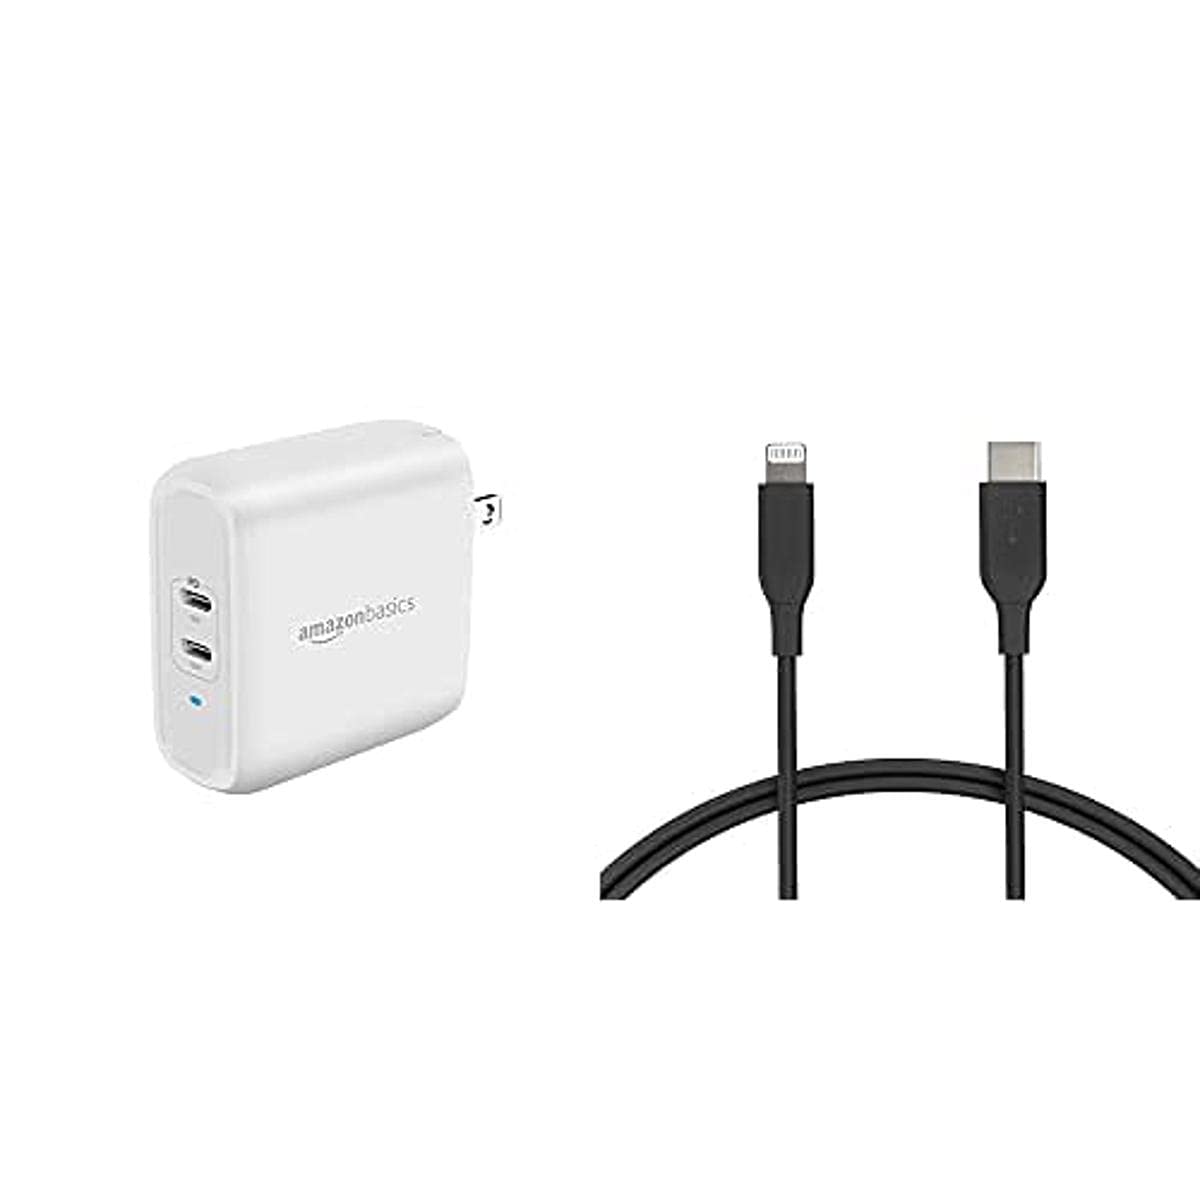 Amazon Basics USB-C Lightning Cable and USB-C Wall Charger Combo, Mfi Certified Charger for Apple iPhone 11, 12, iPad - 3ft Black